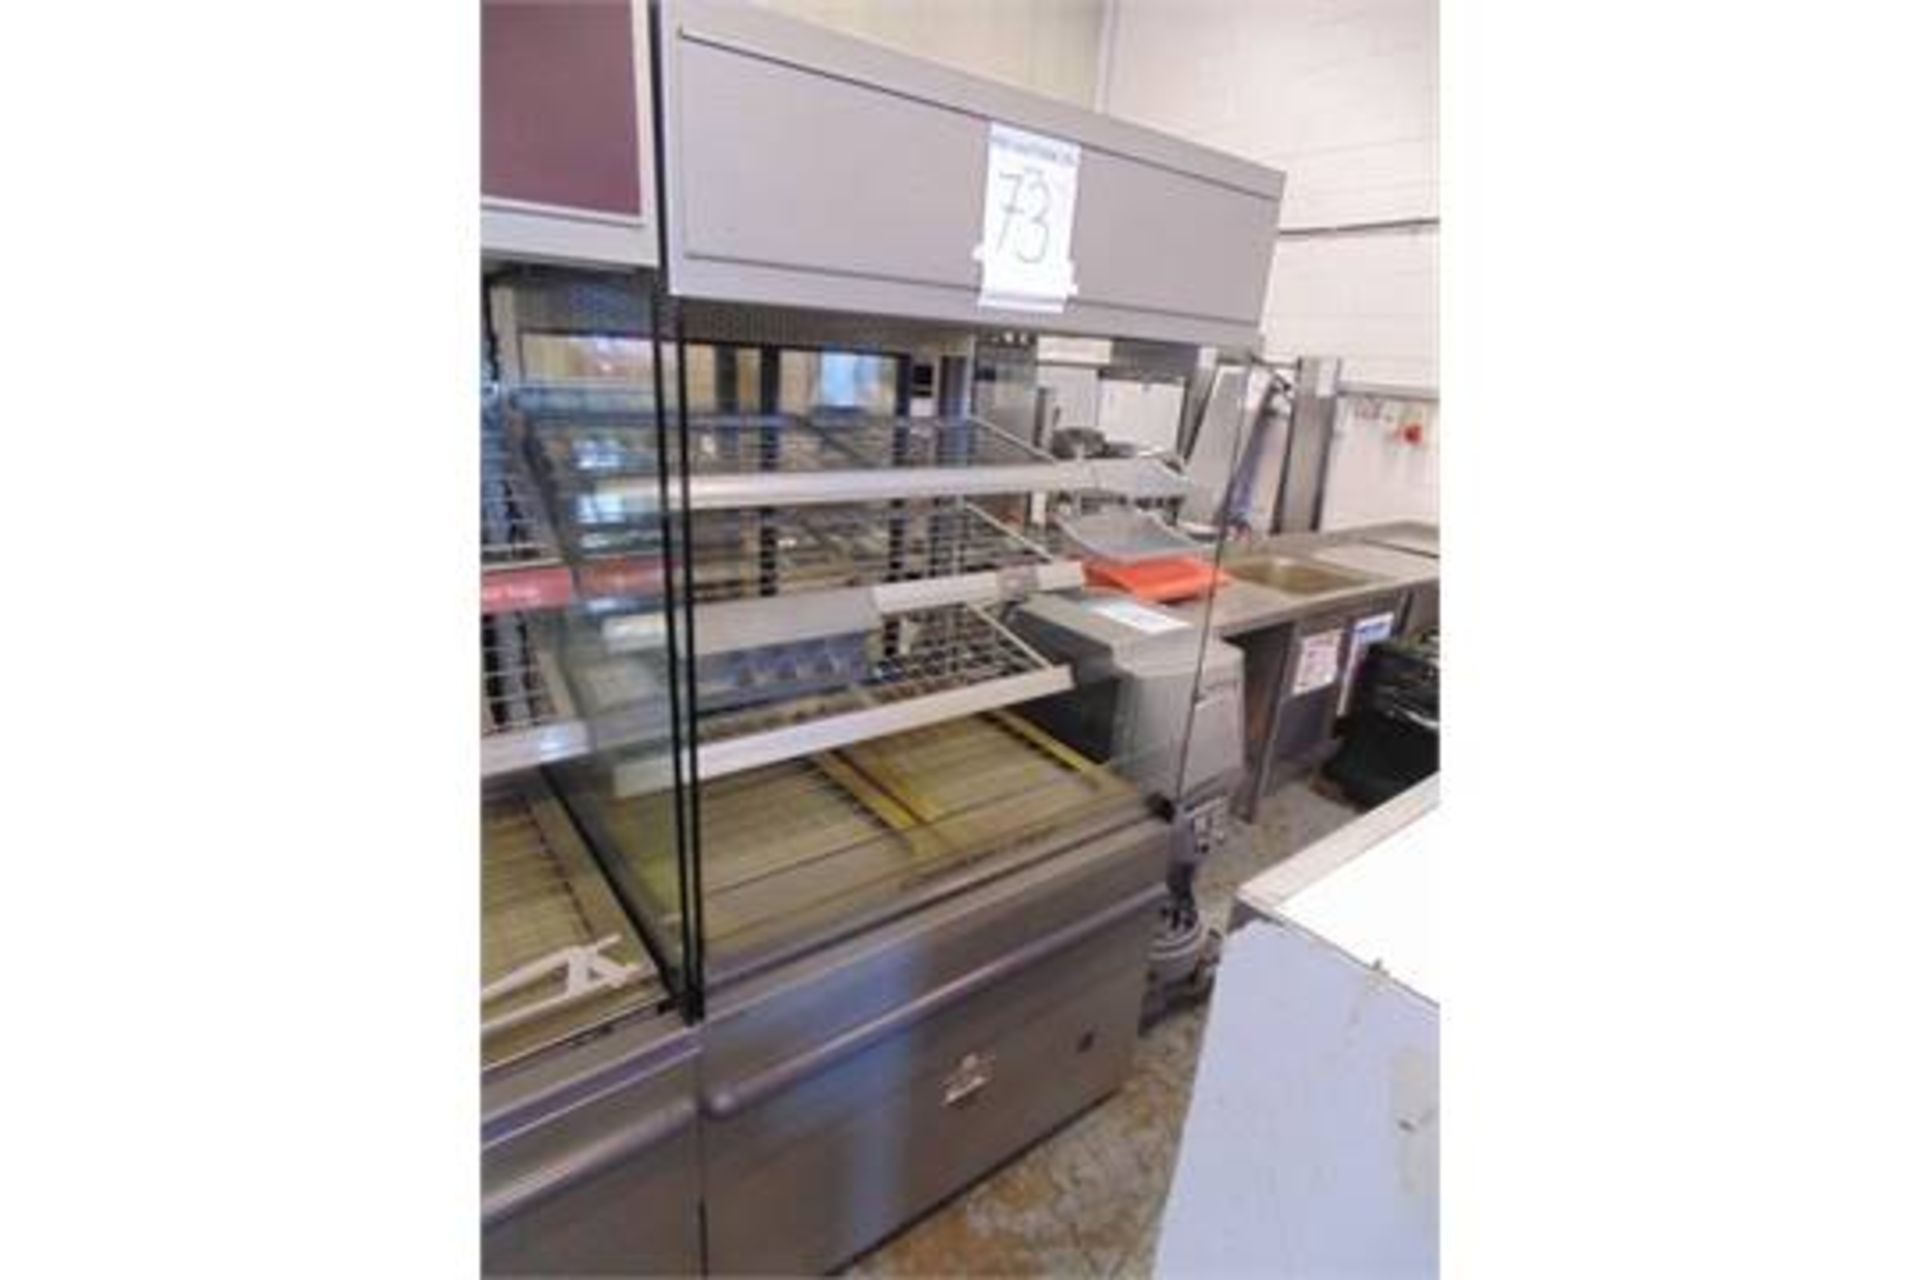 Enodis 900 self service chilled cabinet 900mm x 750mm x 1440mm